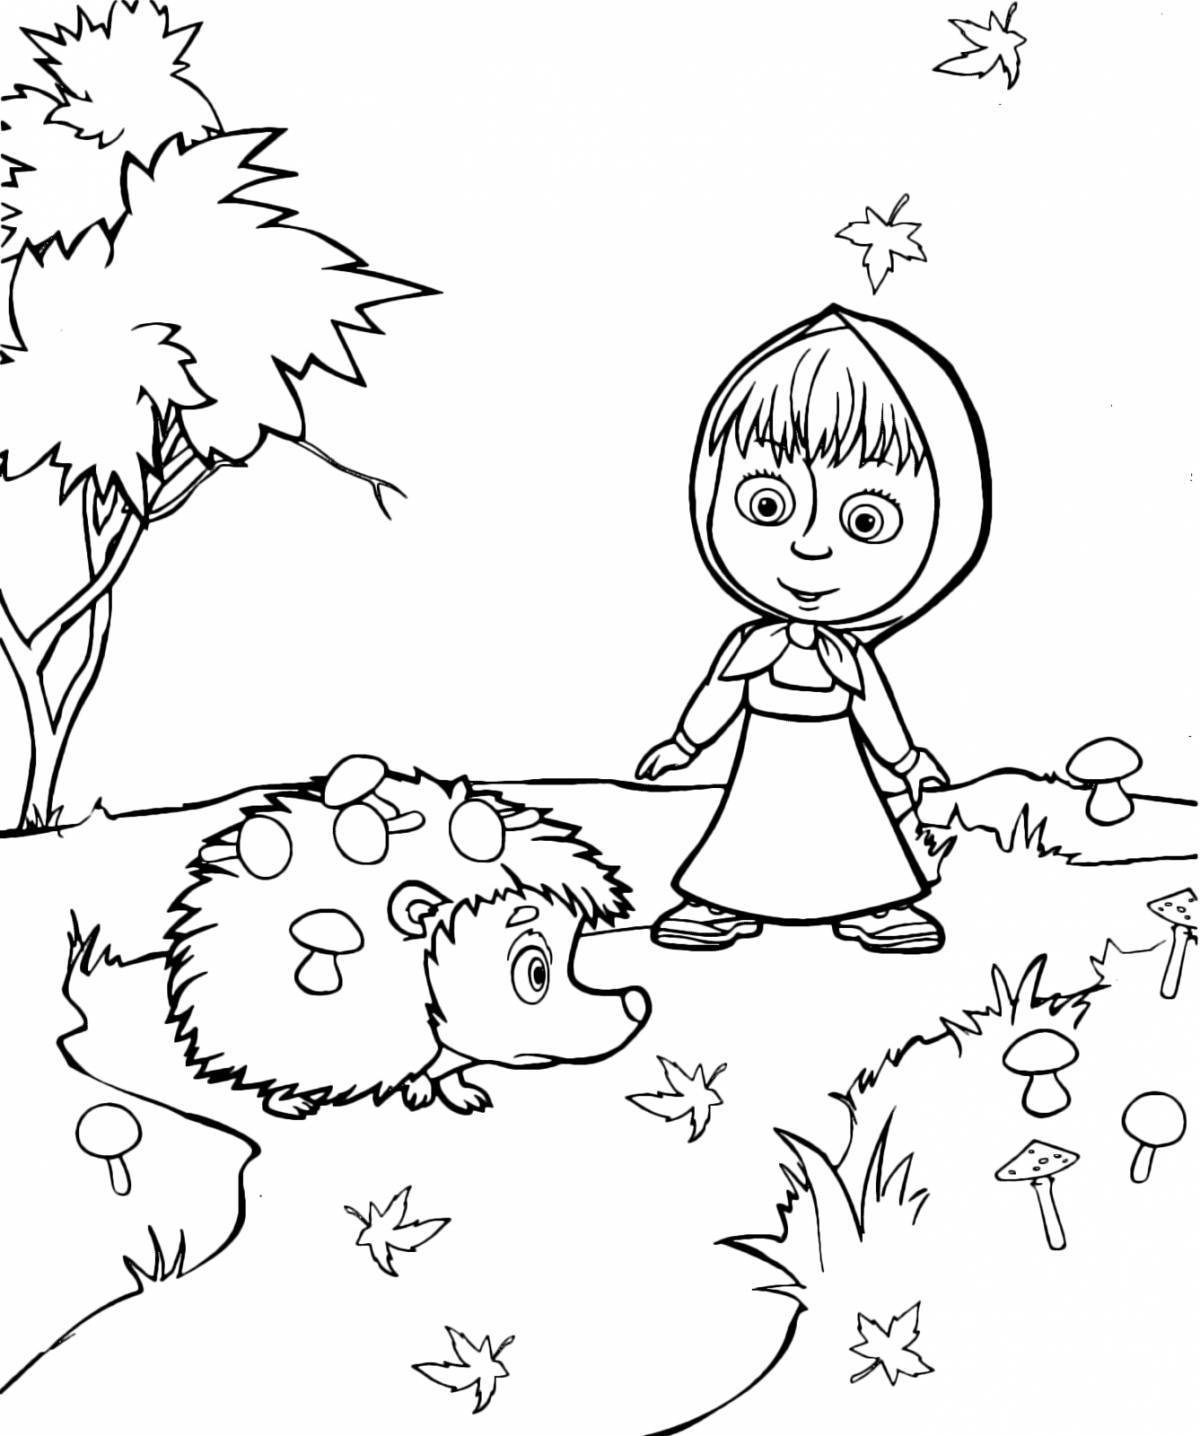 Merry Masha and the Bear coloring book